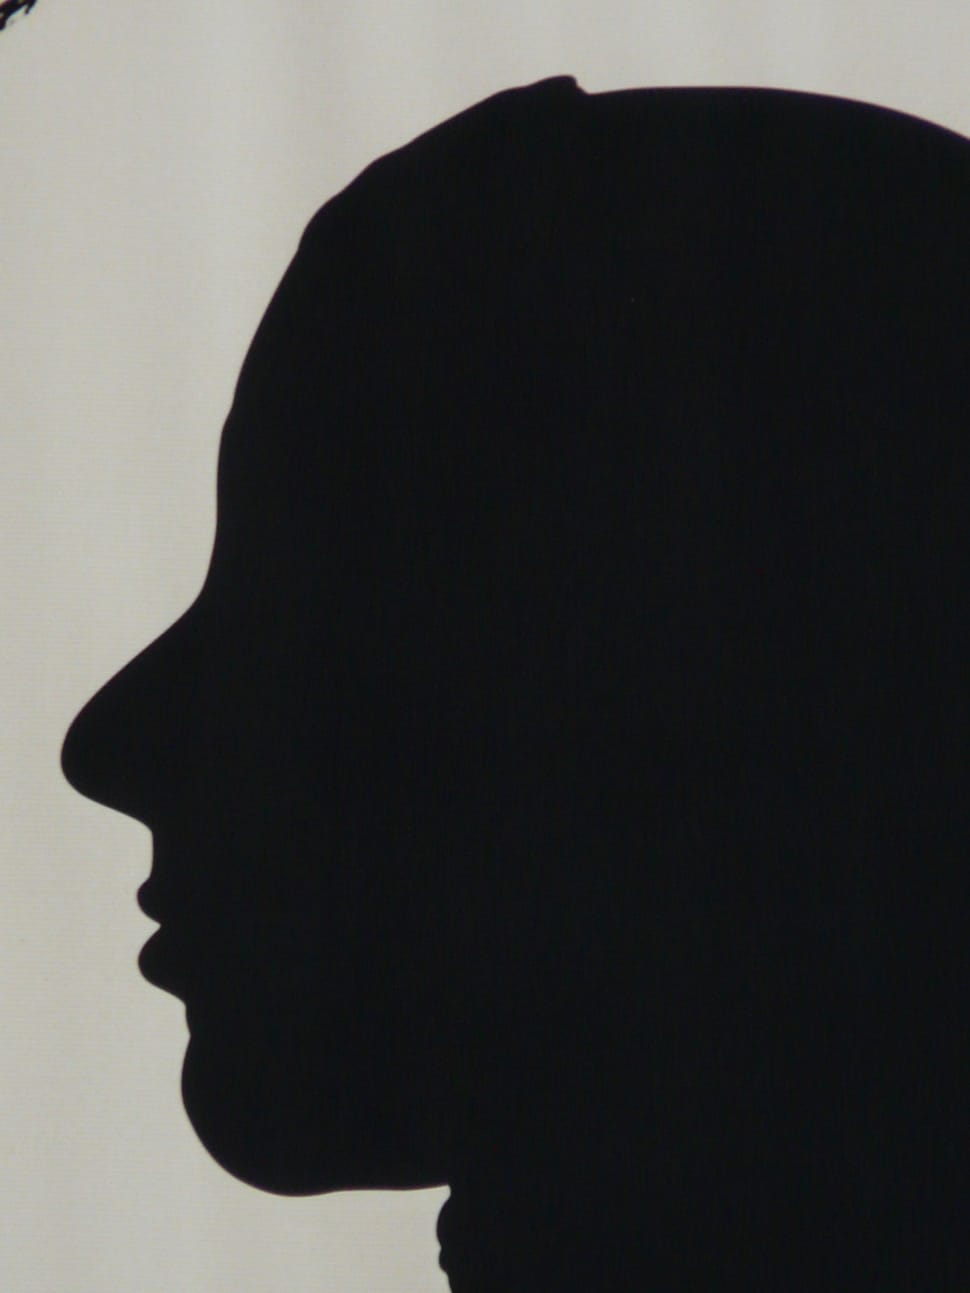 silhouette of person's face preview